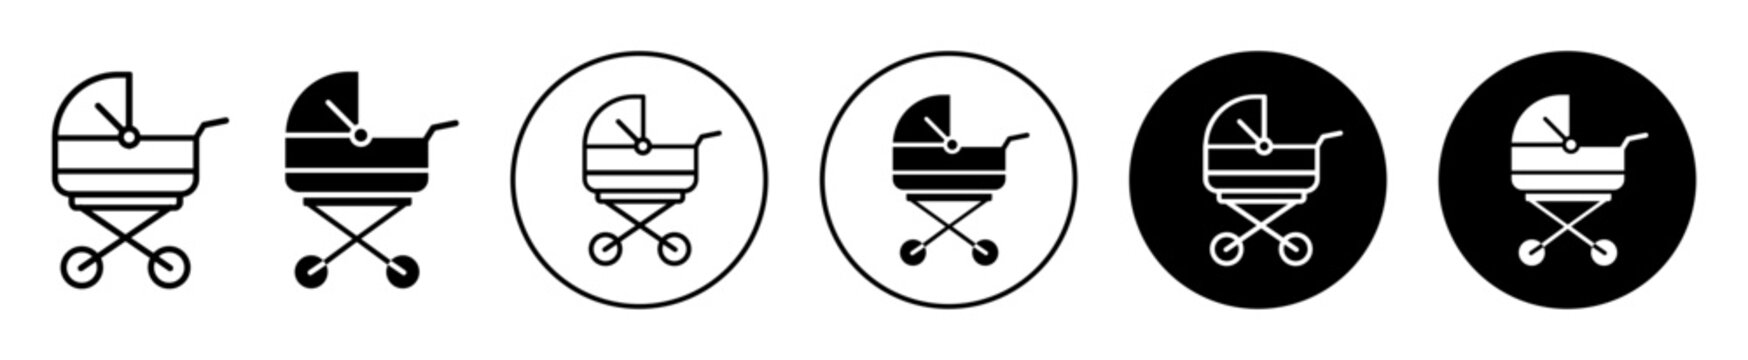 Baby Carriage Icon. Newborn babies stroller cart symbol set. Toddler baby carriage stroller buggy vector sign. Baby carrying trolley pushchair line logo